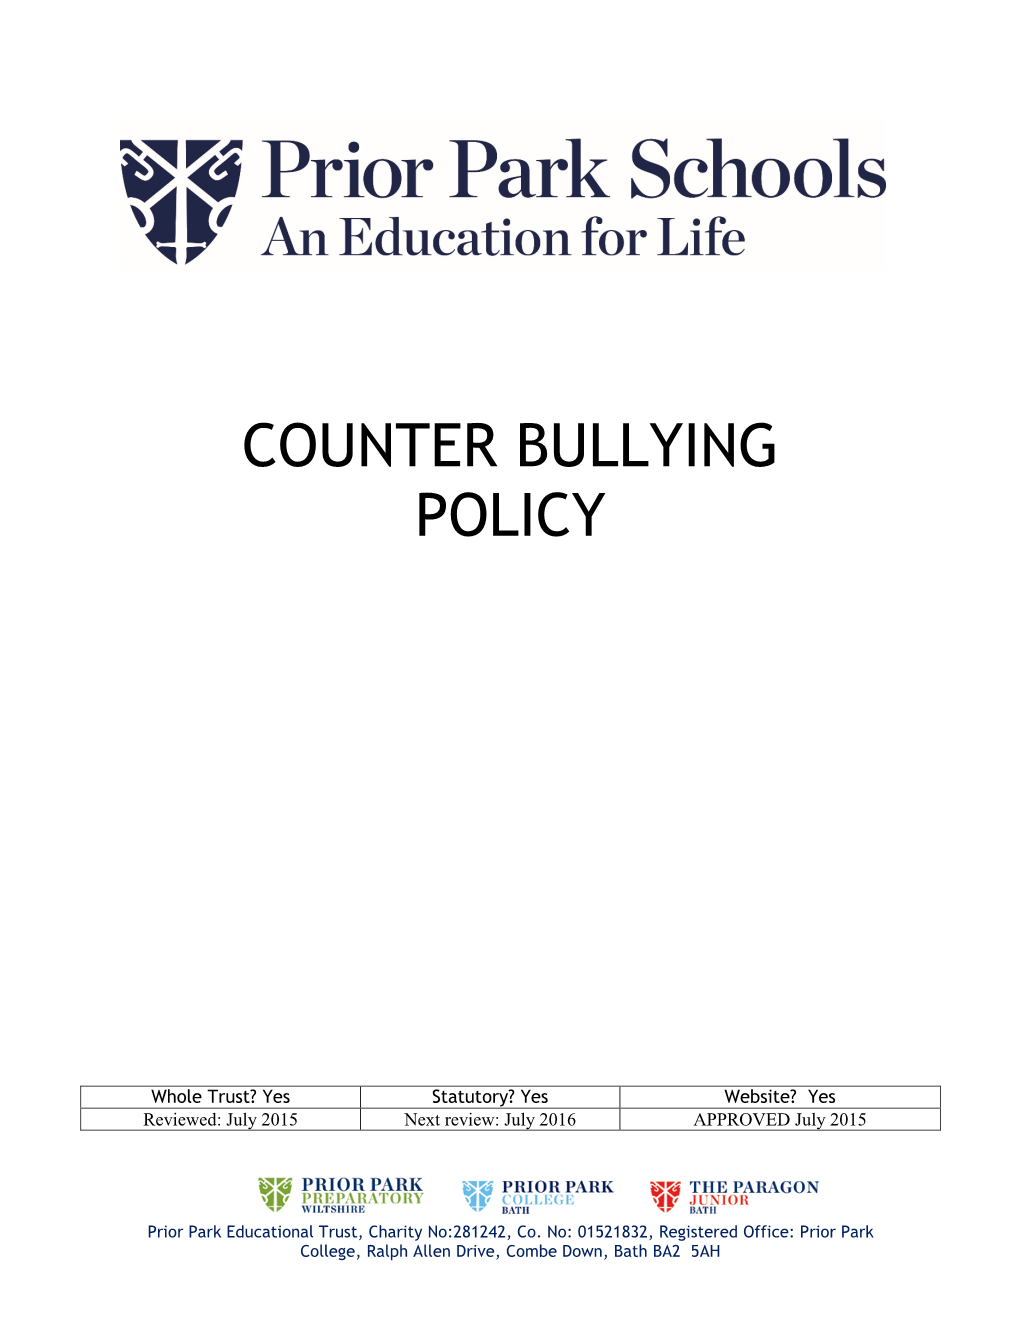 Counter Bullying Policy